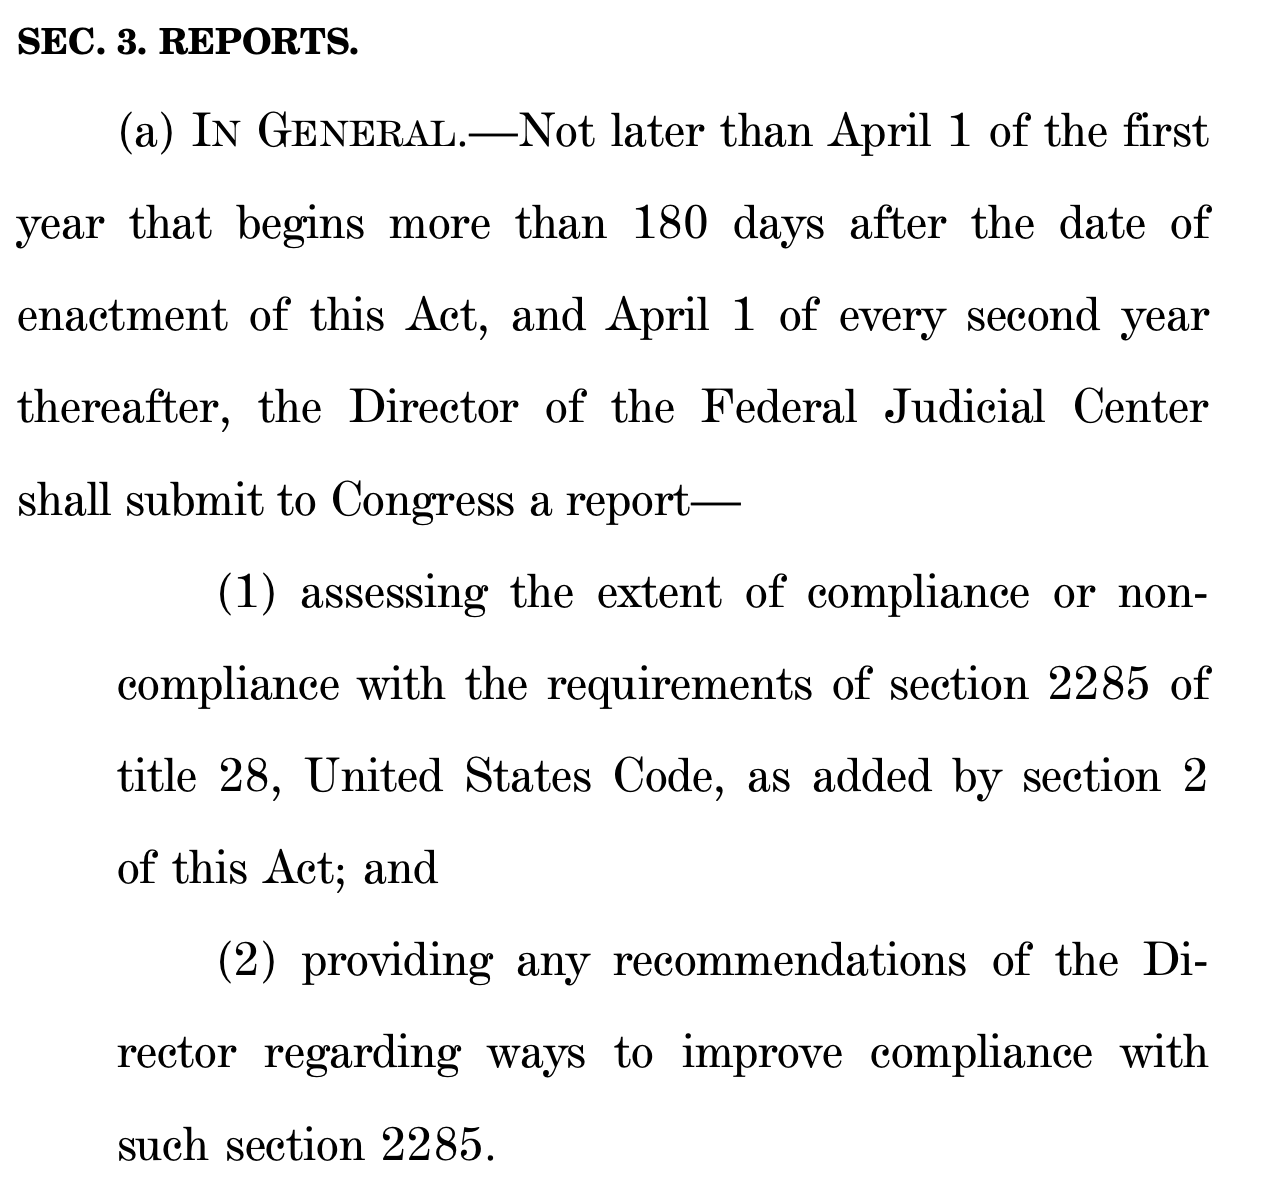 SEC. 3. REPORTS. (a) IN GENERAL.—Not later than April 1 of the first year that begins more than 180 days after the date of enactment of this Act, and April 1 of every second year thereafter, the Director of the Federal Judicial Center shall submit to Congress a report— (1) assessing the extent of compliance or non- compliance with the requirements of section 2285 of title 28, United States Code, as added by section 2 of this Act; and (2) providing any recommendations of the Di- rector regarding ways to improve compliance with such section 2285.